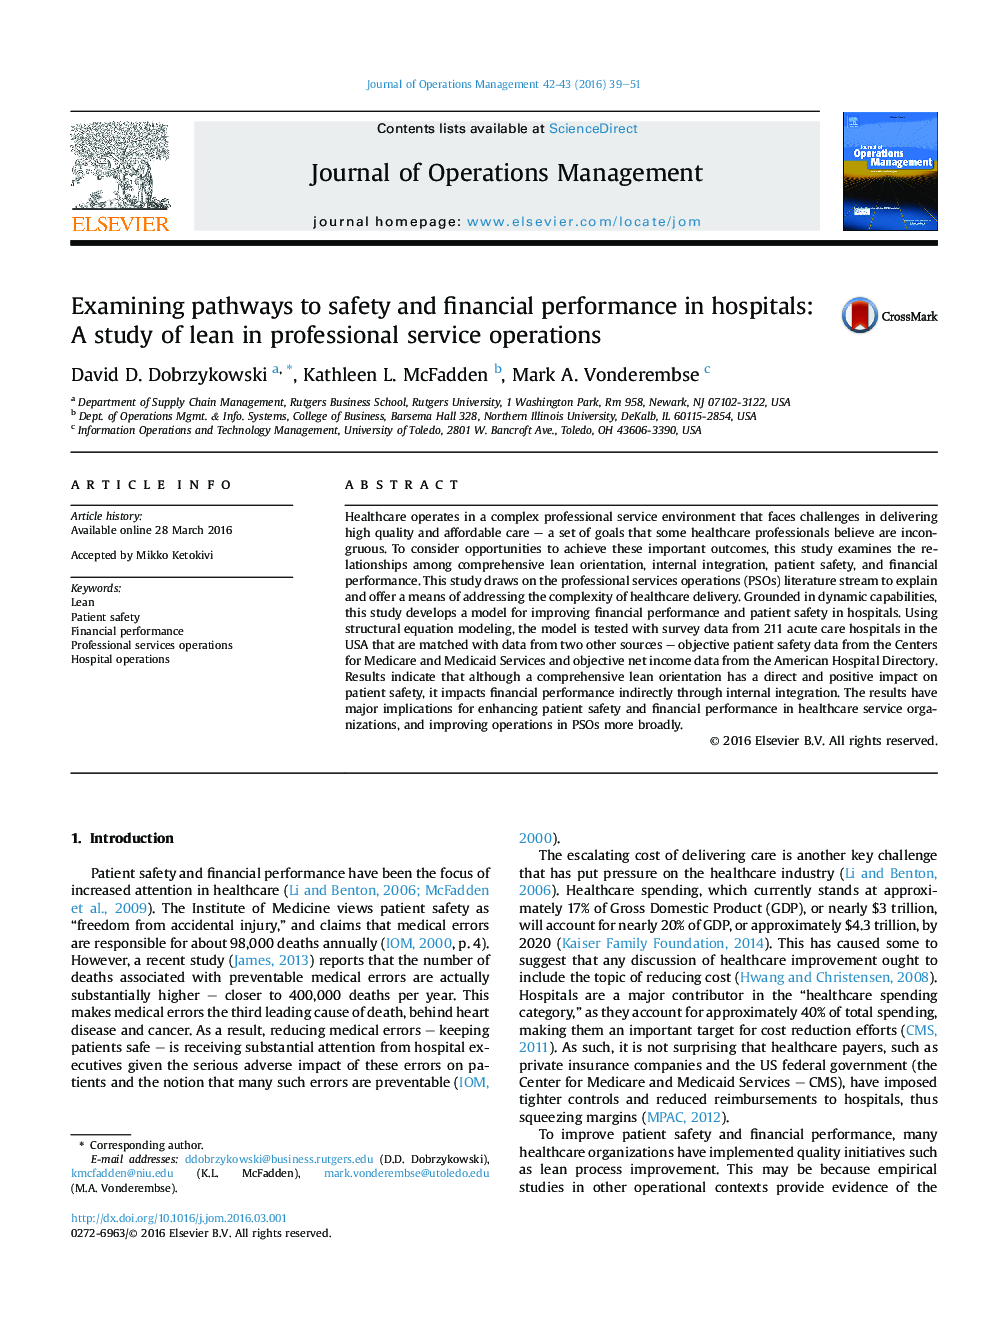 Examining pathways to safety and financial performance in hospitals: A study of lean in professional service operations